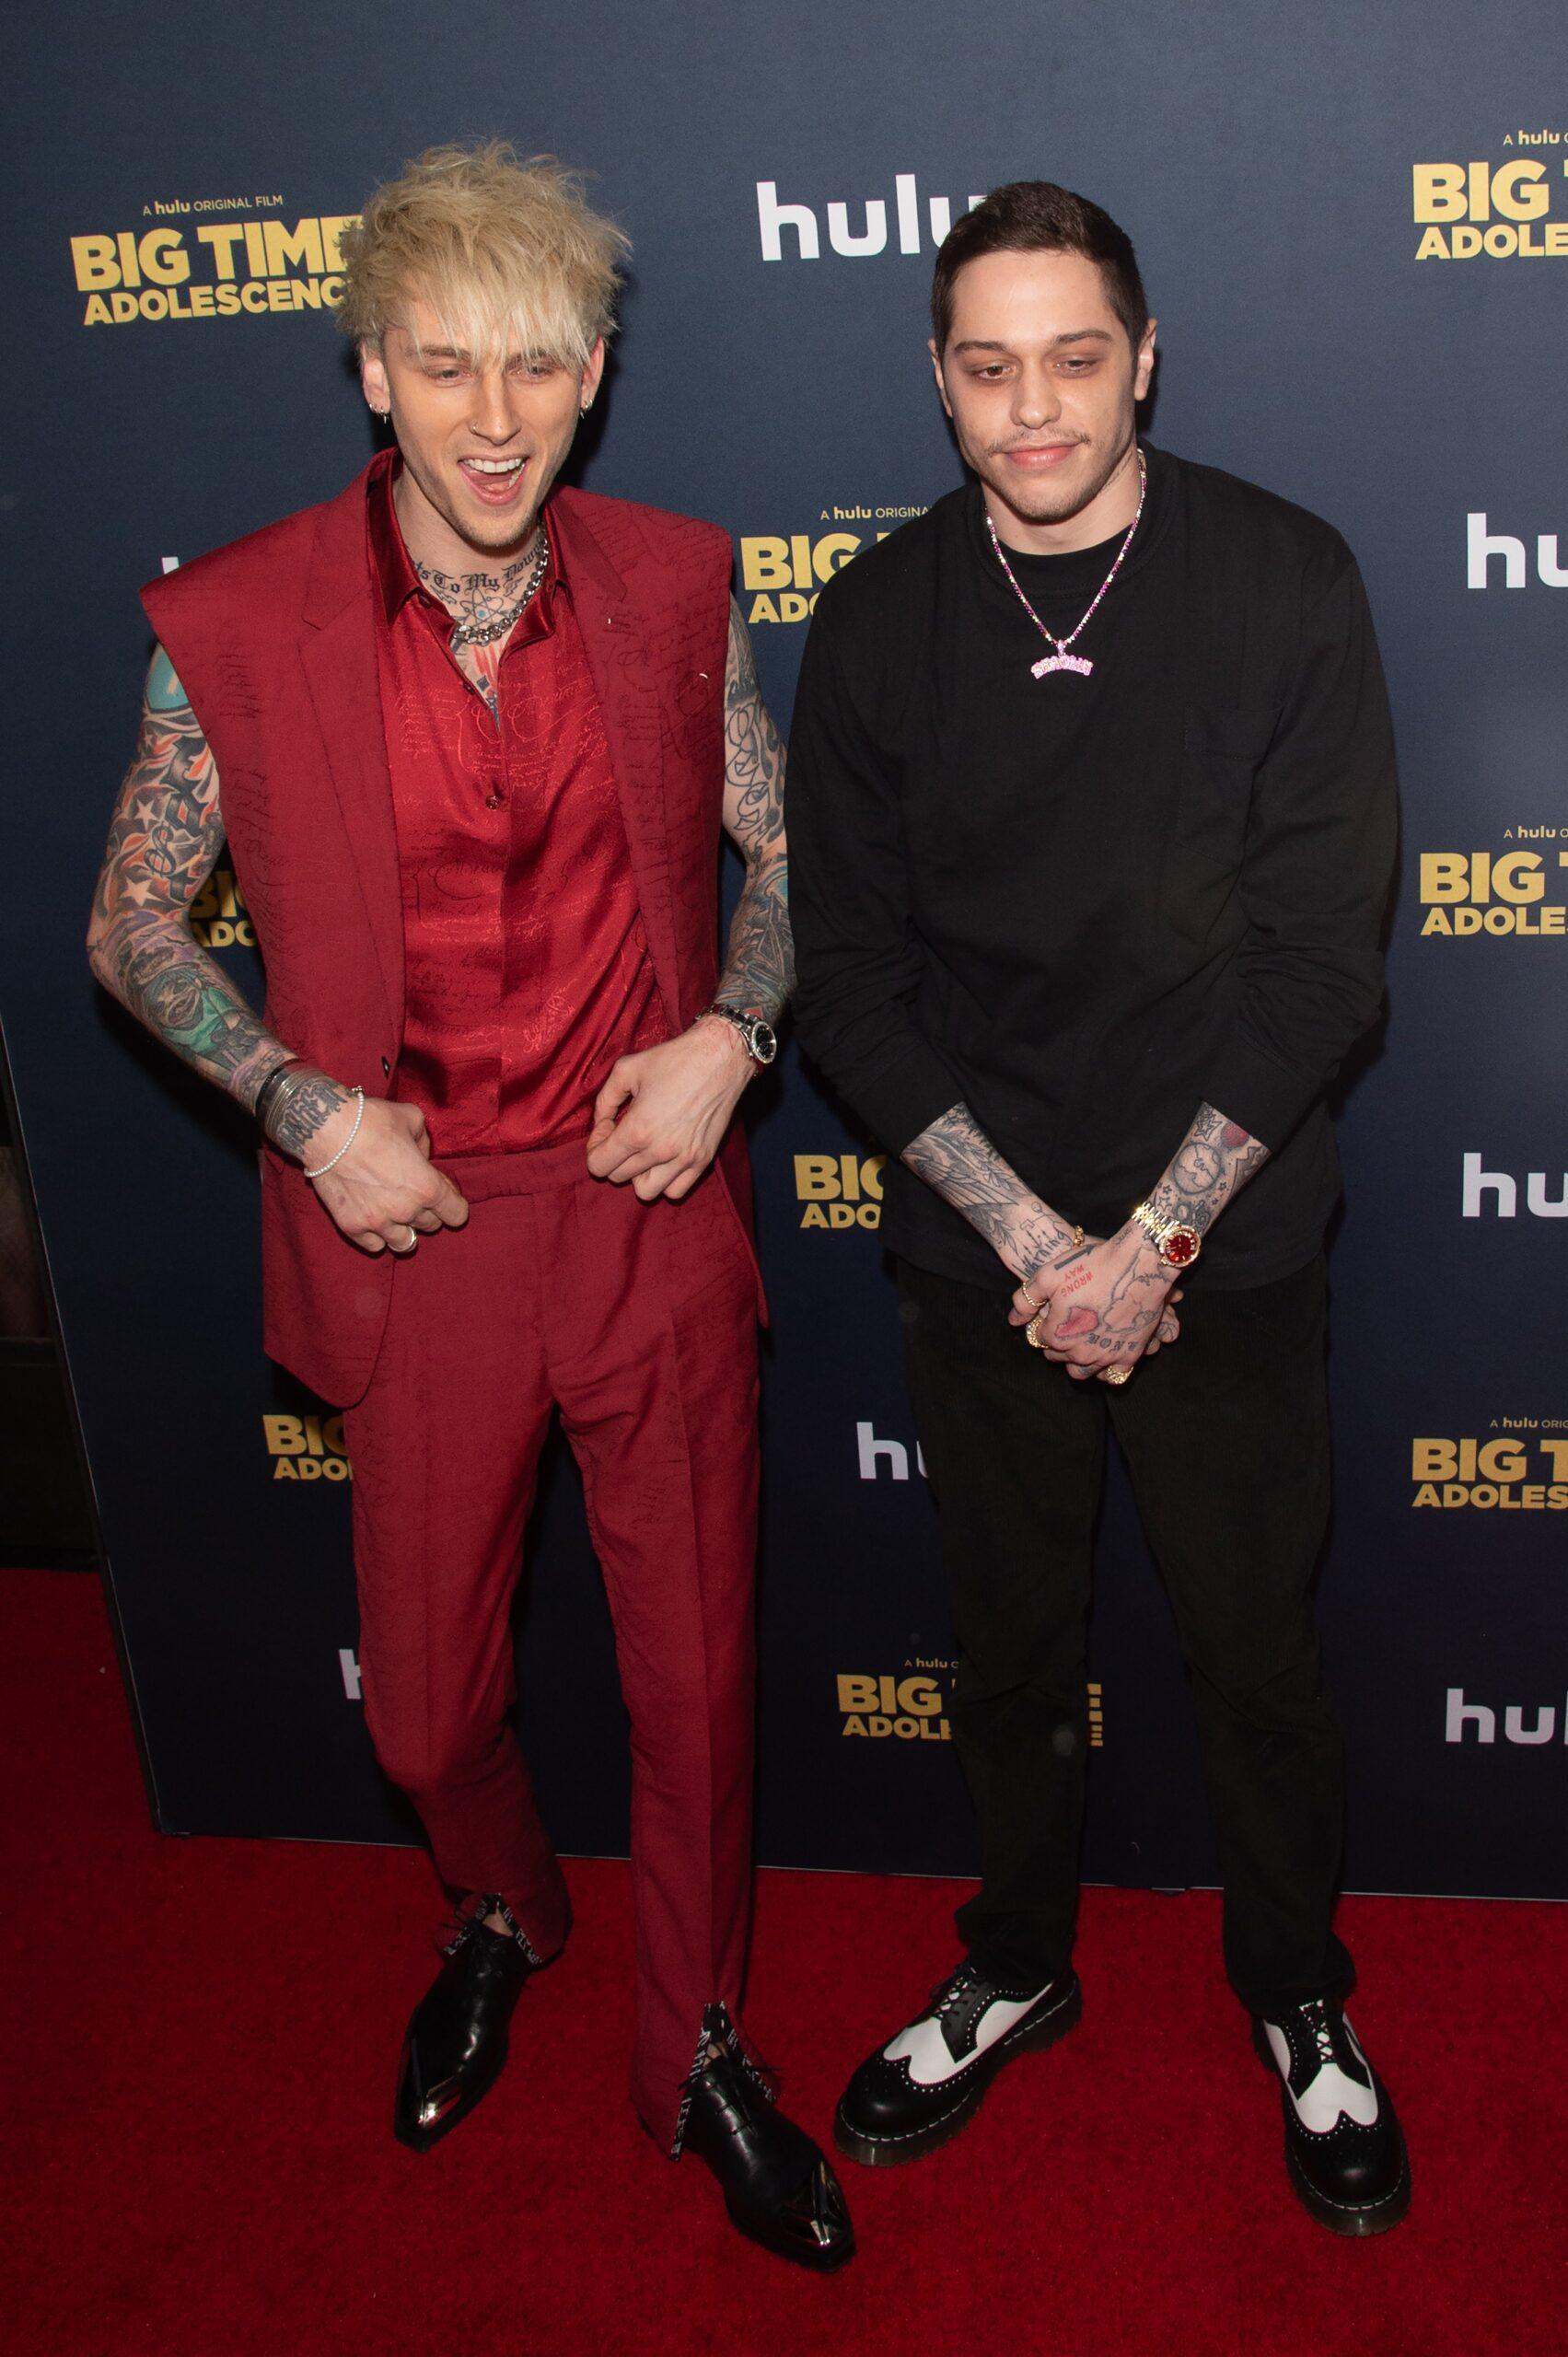 Machine Gun Kelly and Pete Davidson attend the premiere of "Big Time Adolescence" at Metrograph on March 05, 2020 in New York City